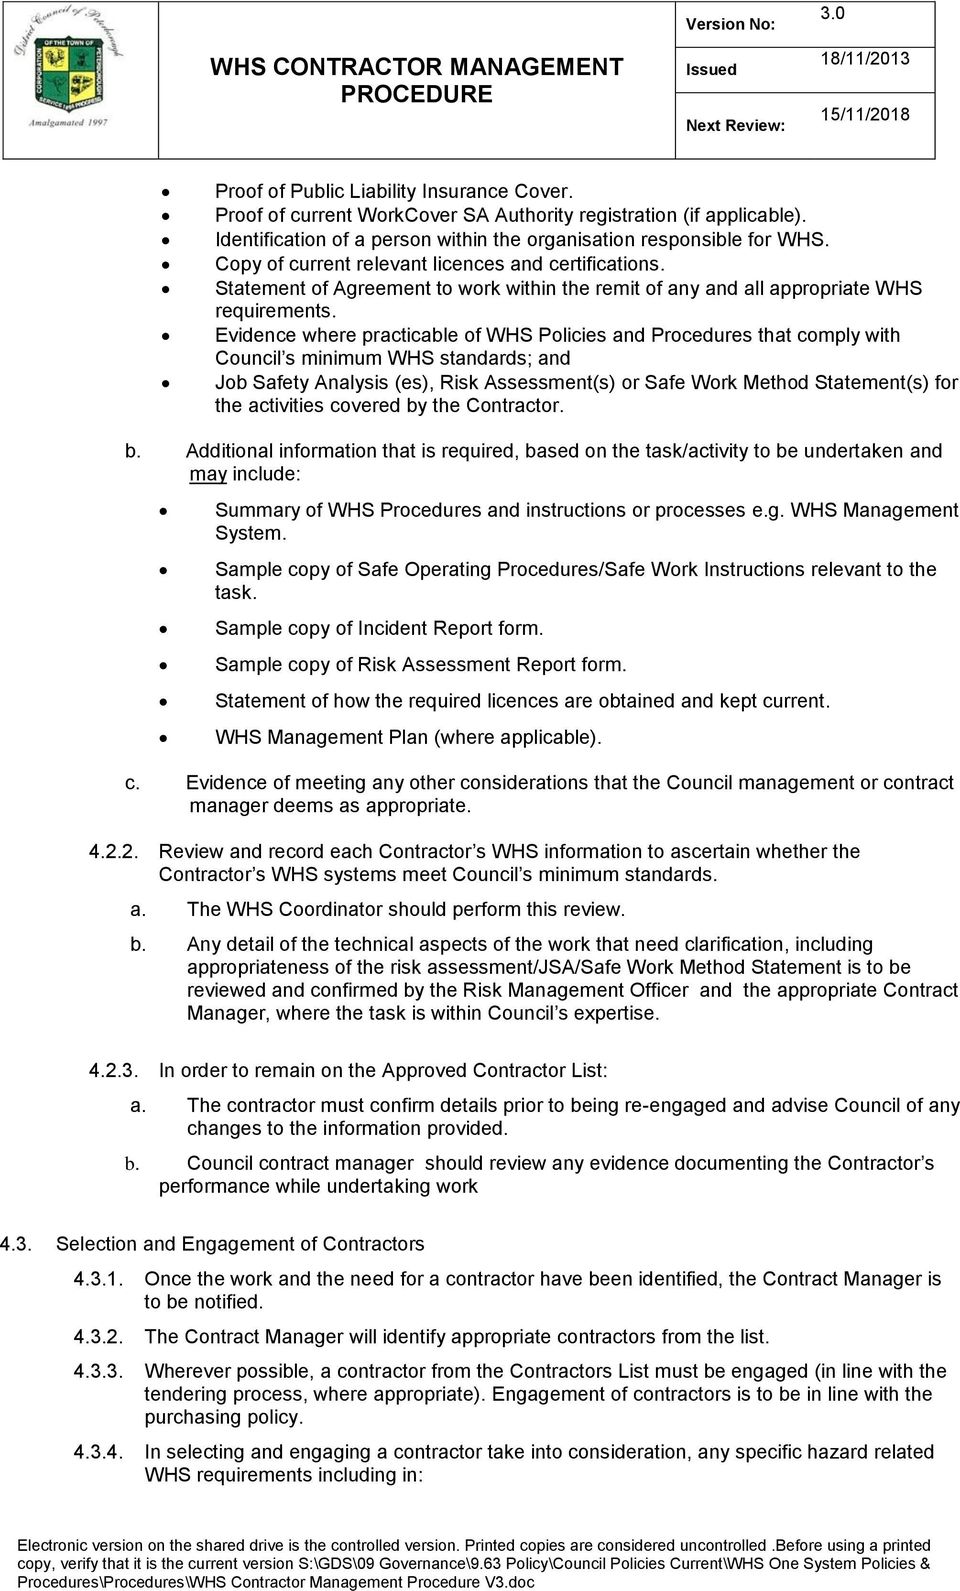 Statement of Agreement to work within the remit of any and all appropriate WHS requirements.